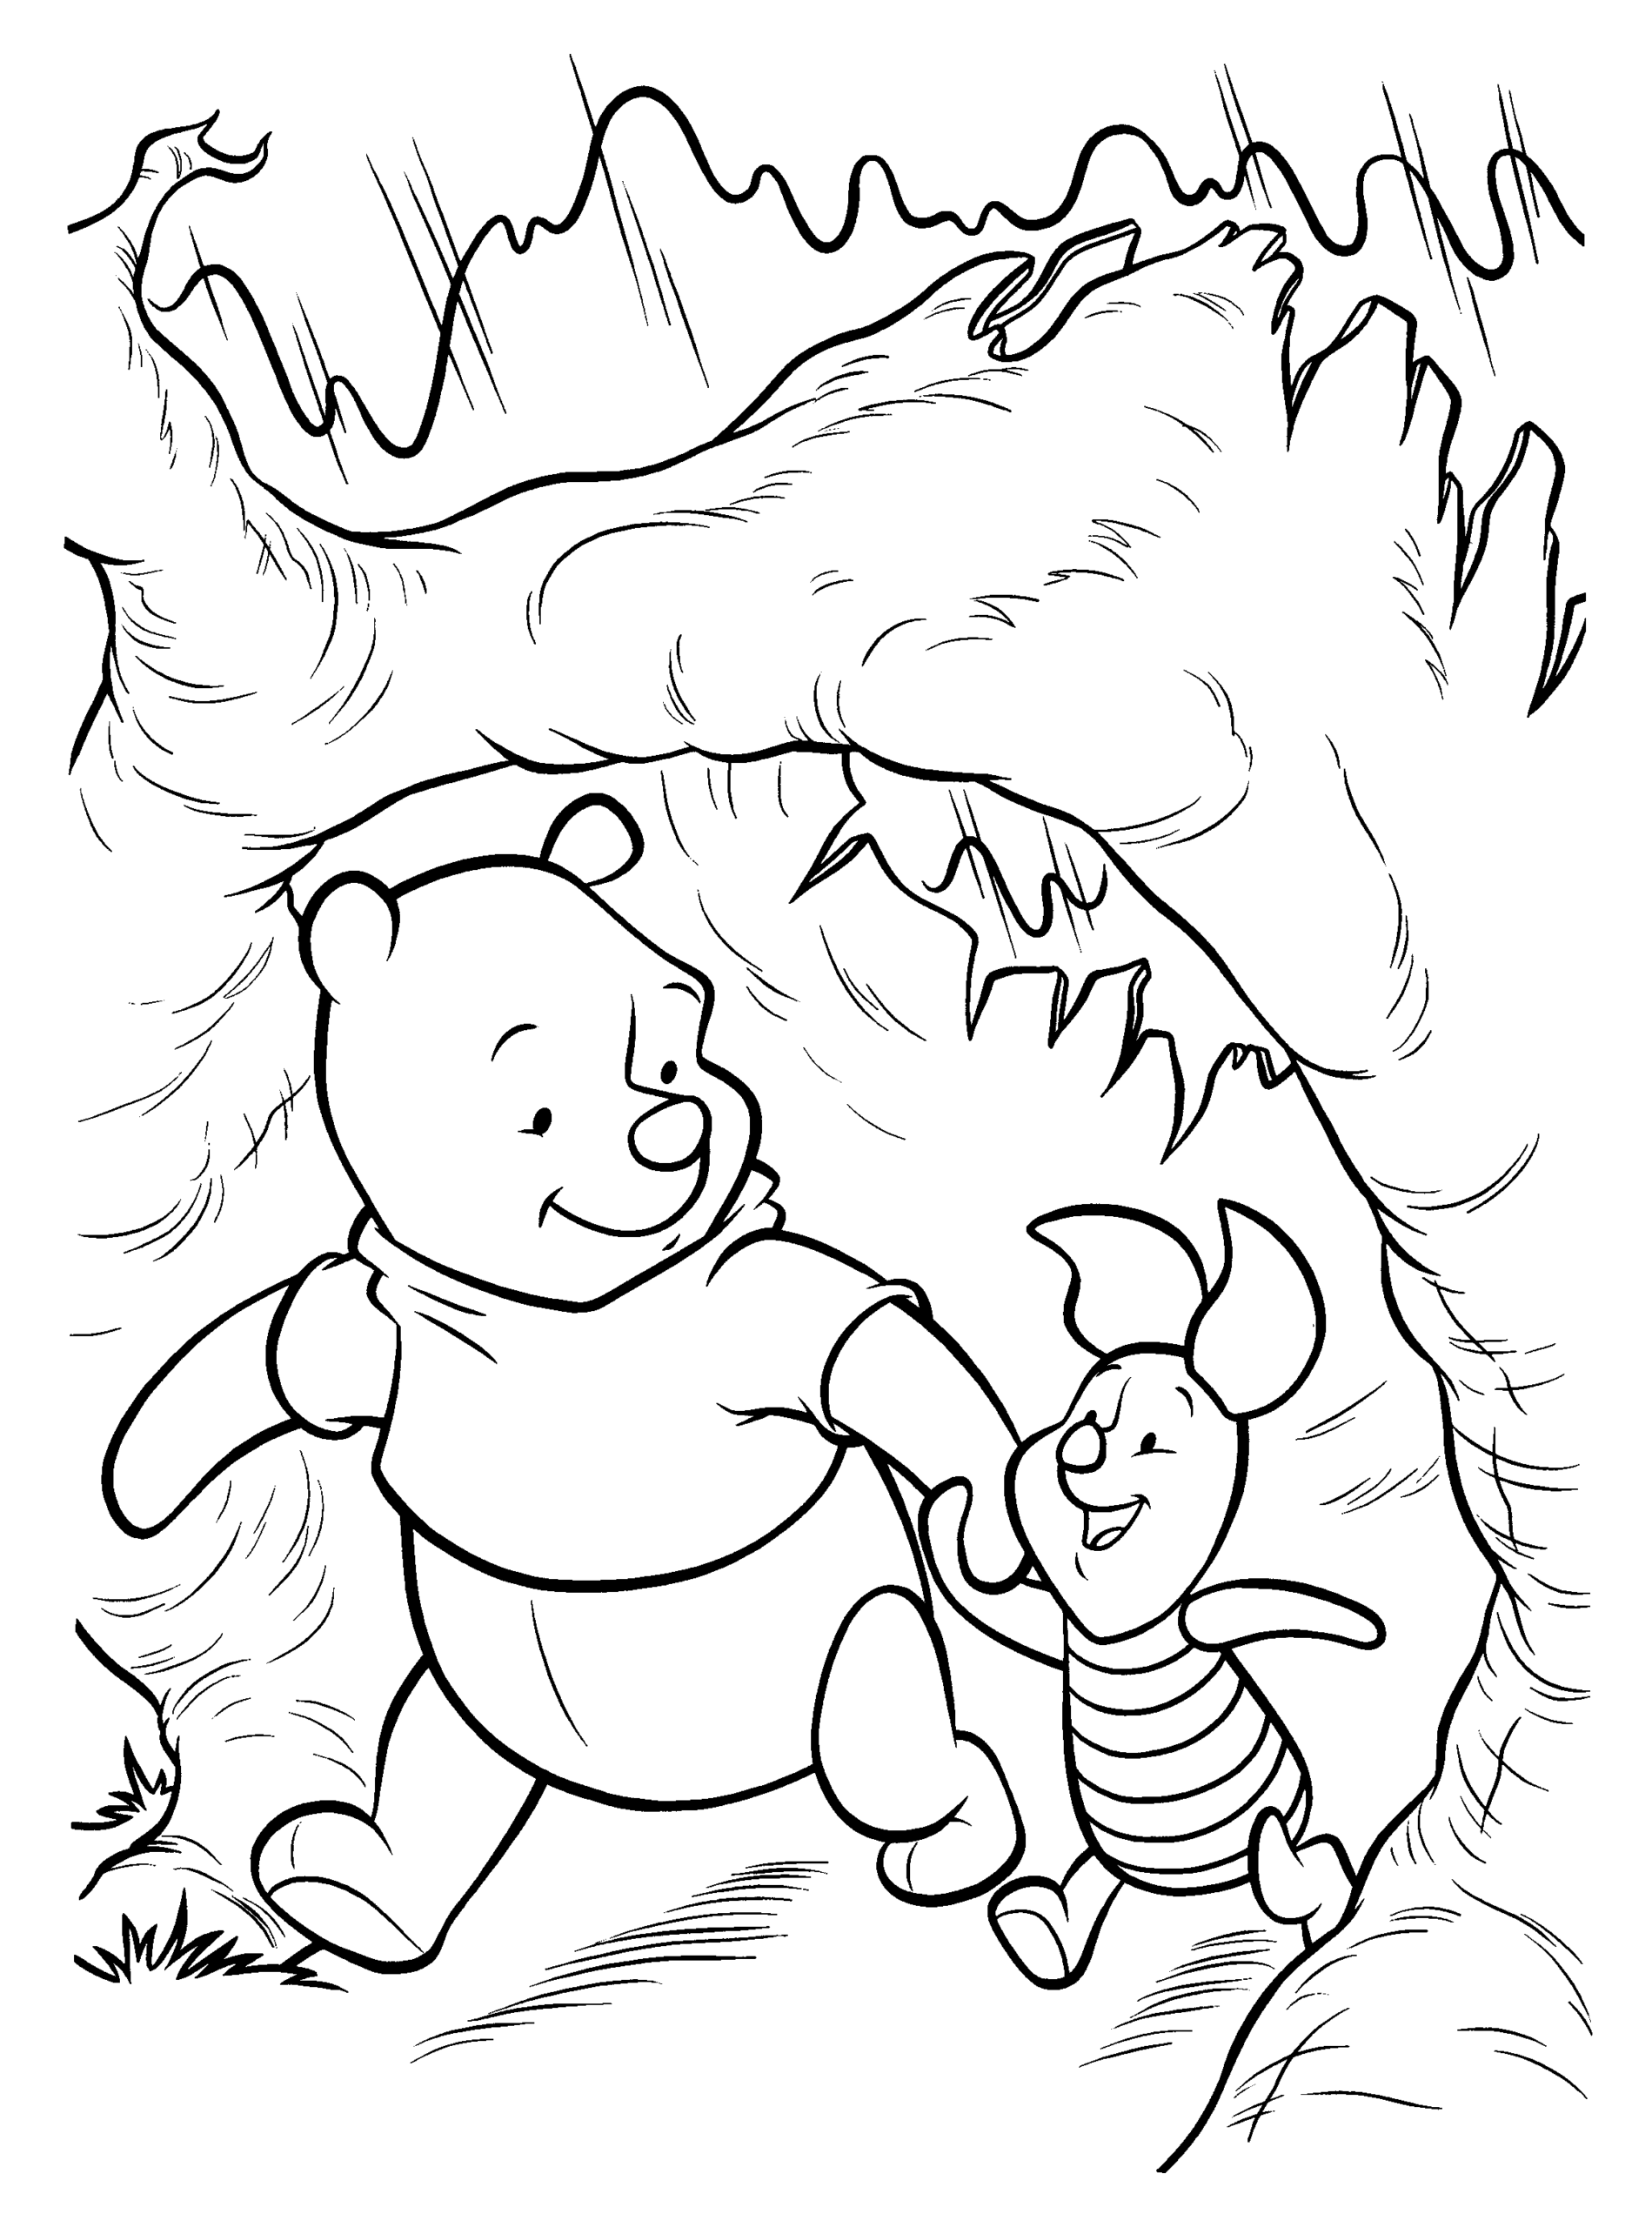 Winnie the Pooh Coloring Pages Cartoons winnie the pooh 4 Printable 2020 7146 Coloring4free